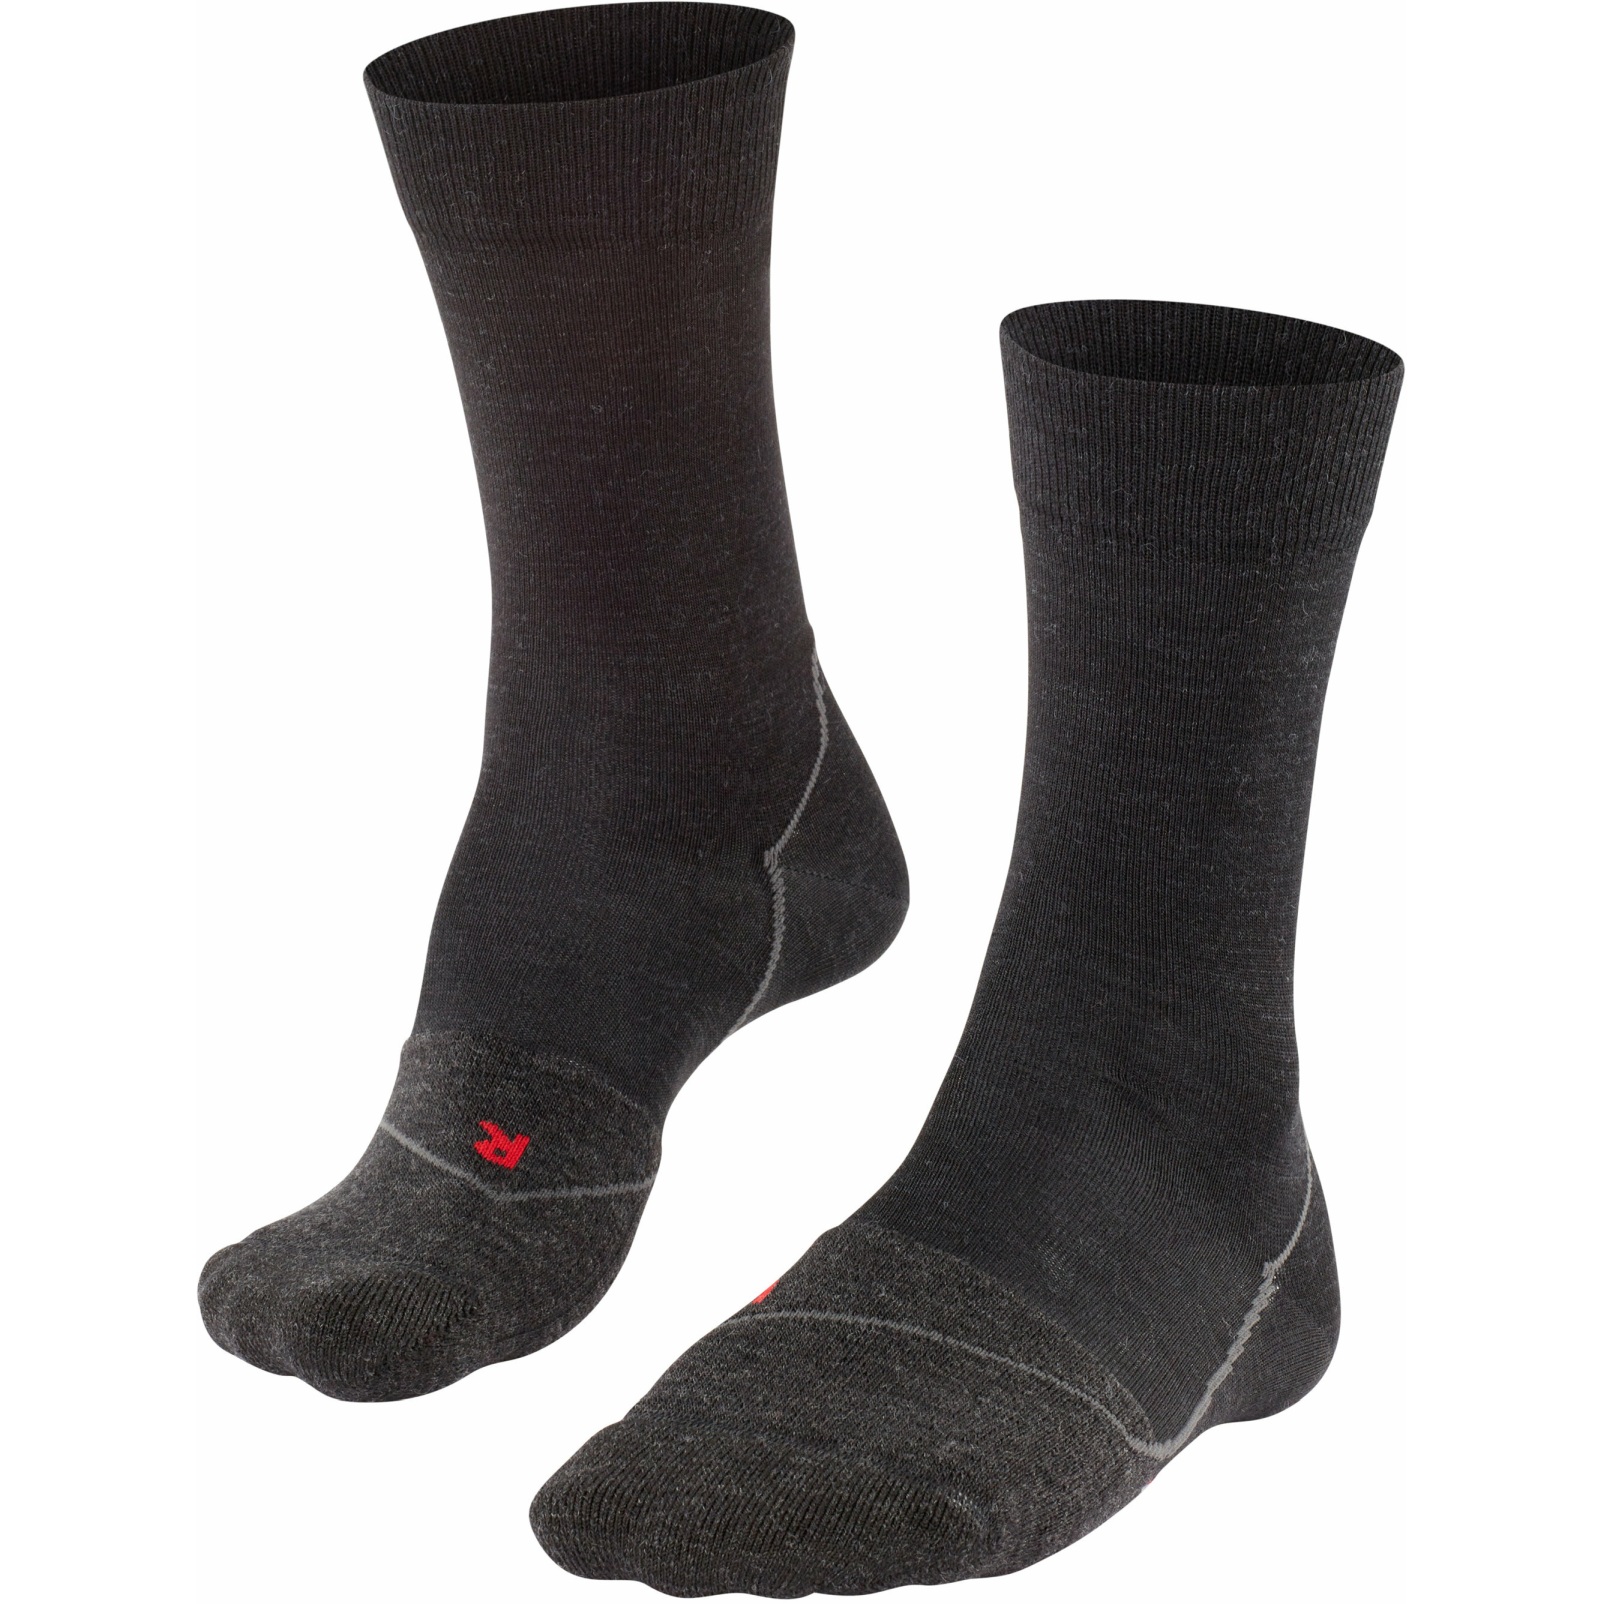 Picture of Falke BC Warm Cycling Socks - black-mix 3010